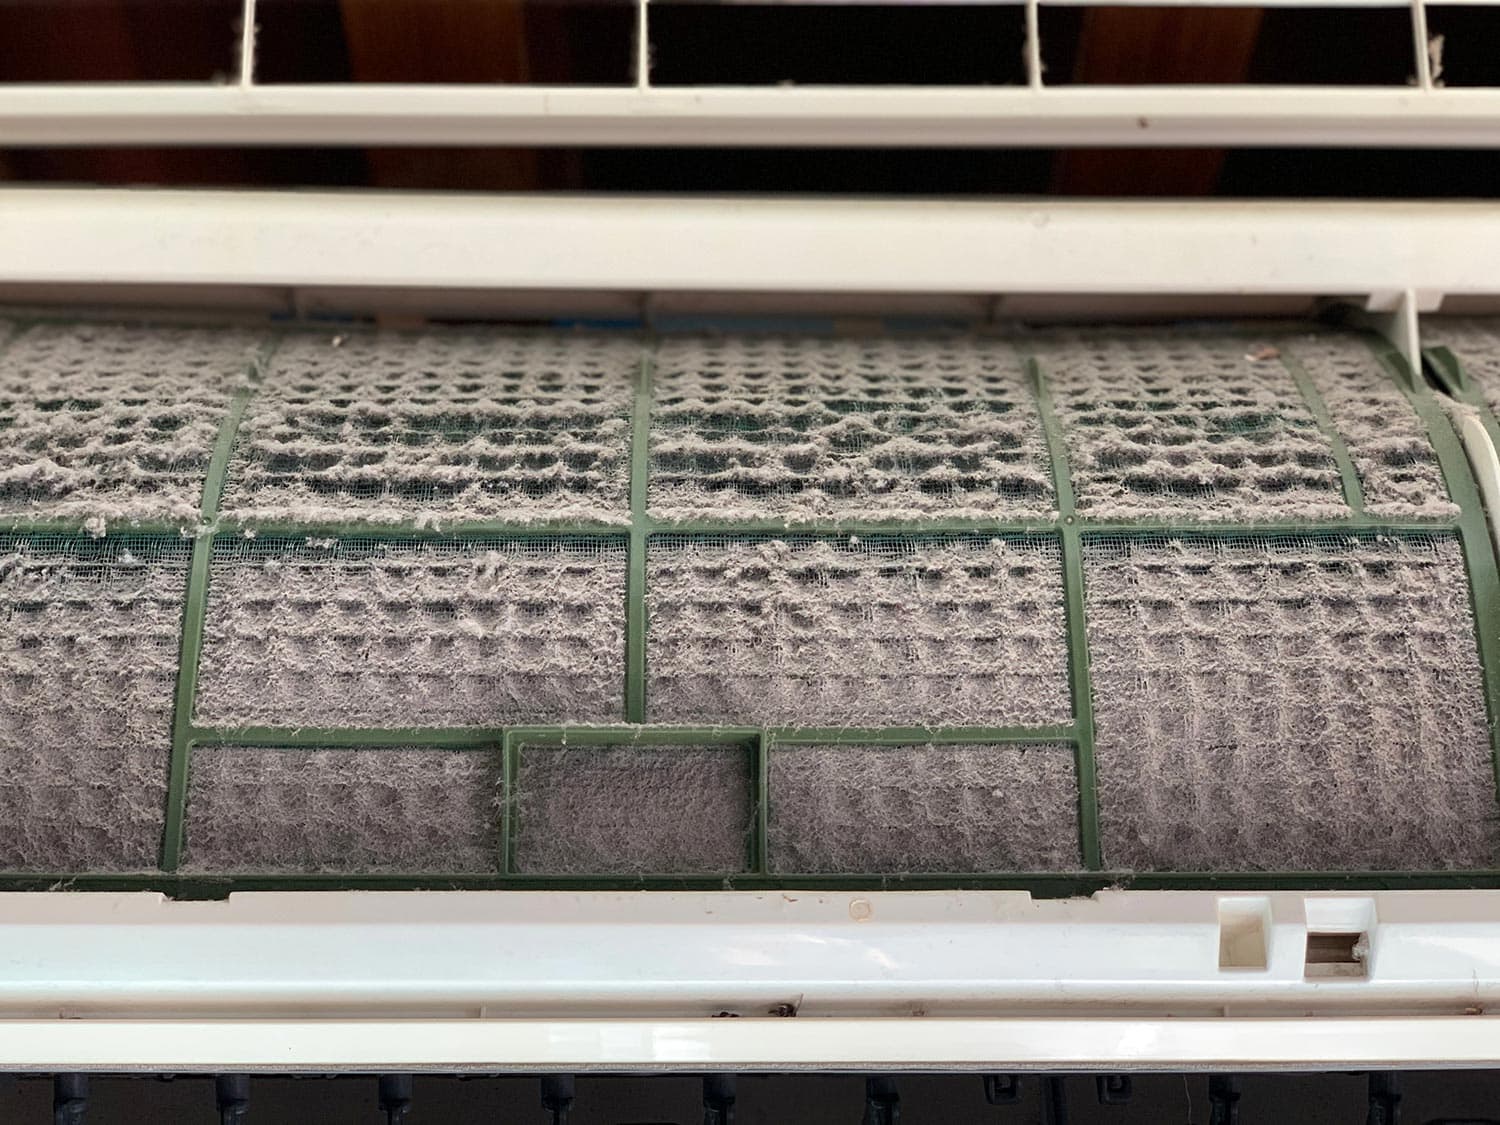 Very dirty air conditioner filter with a lot of dust